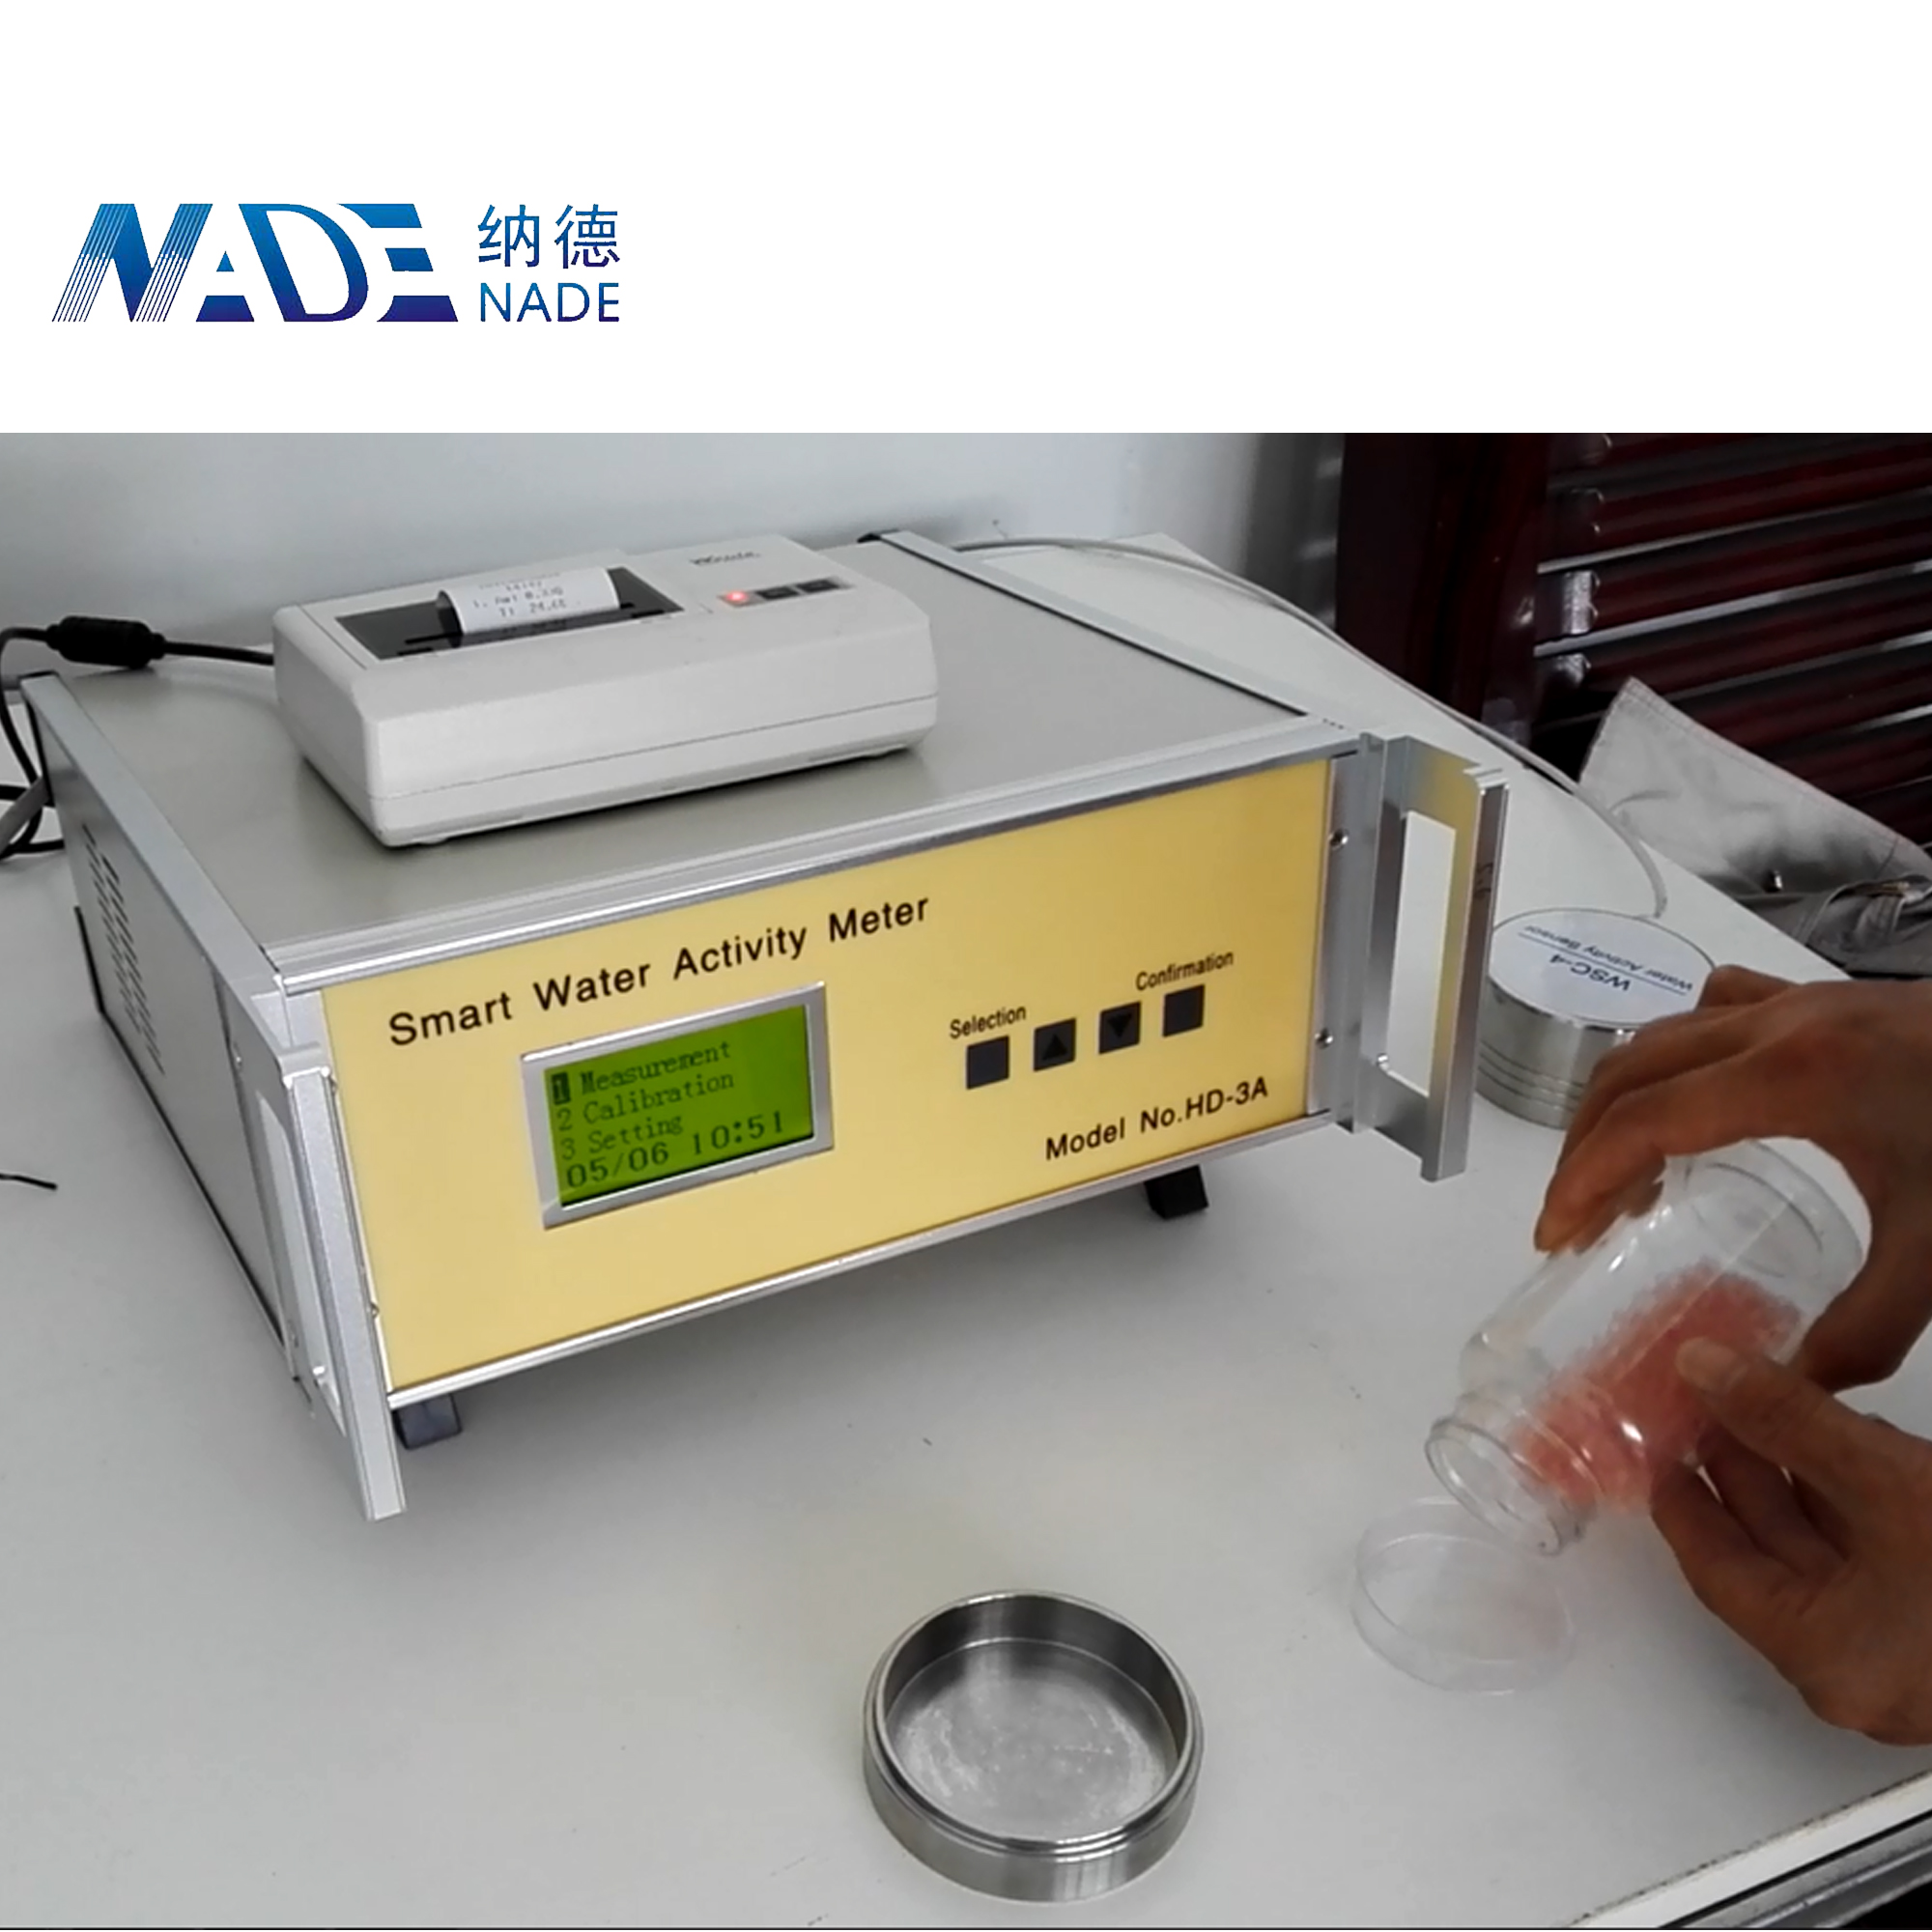 NADE HD-3A Intelligent Water Activity Meter for food